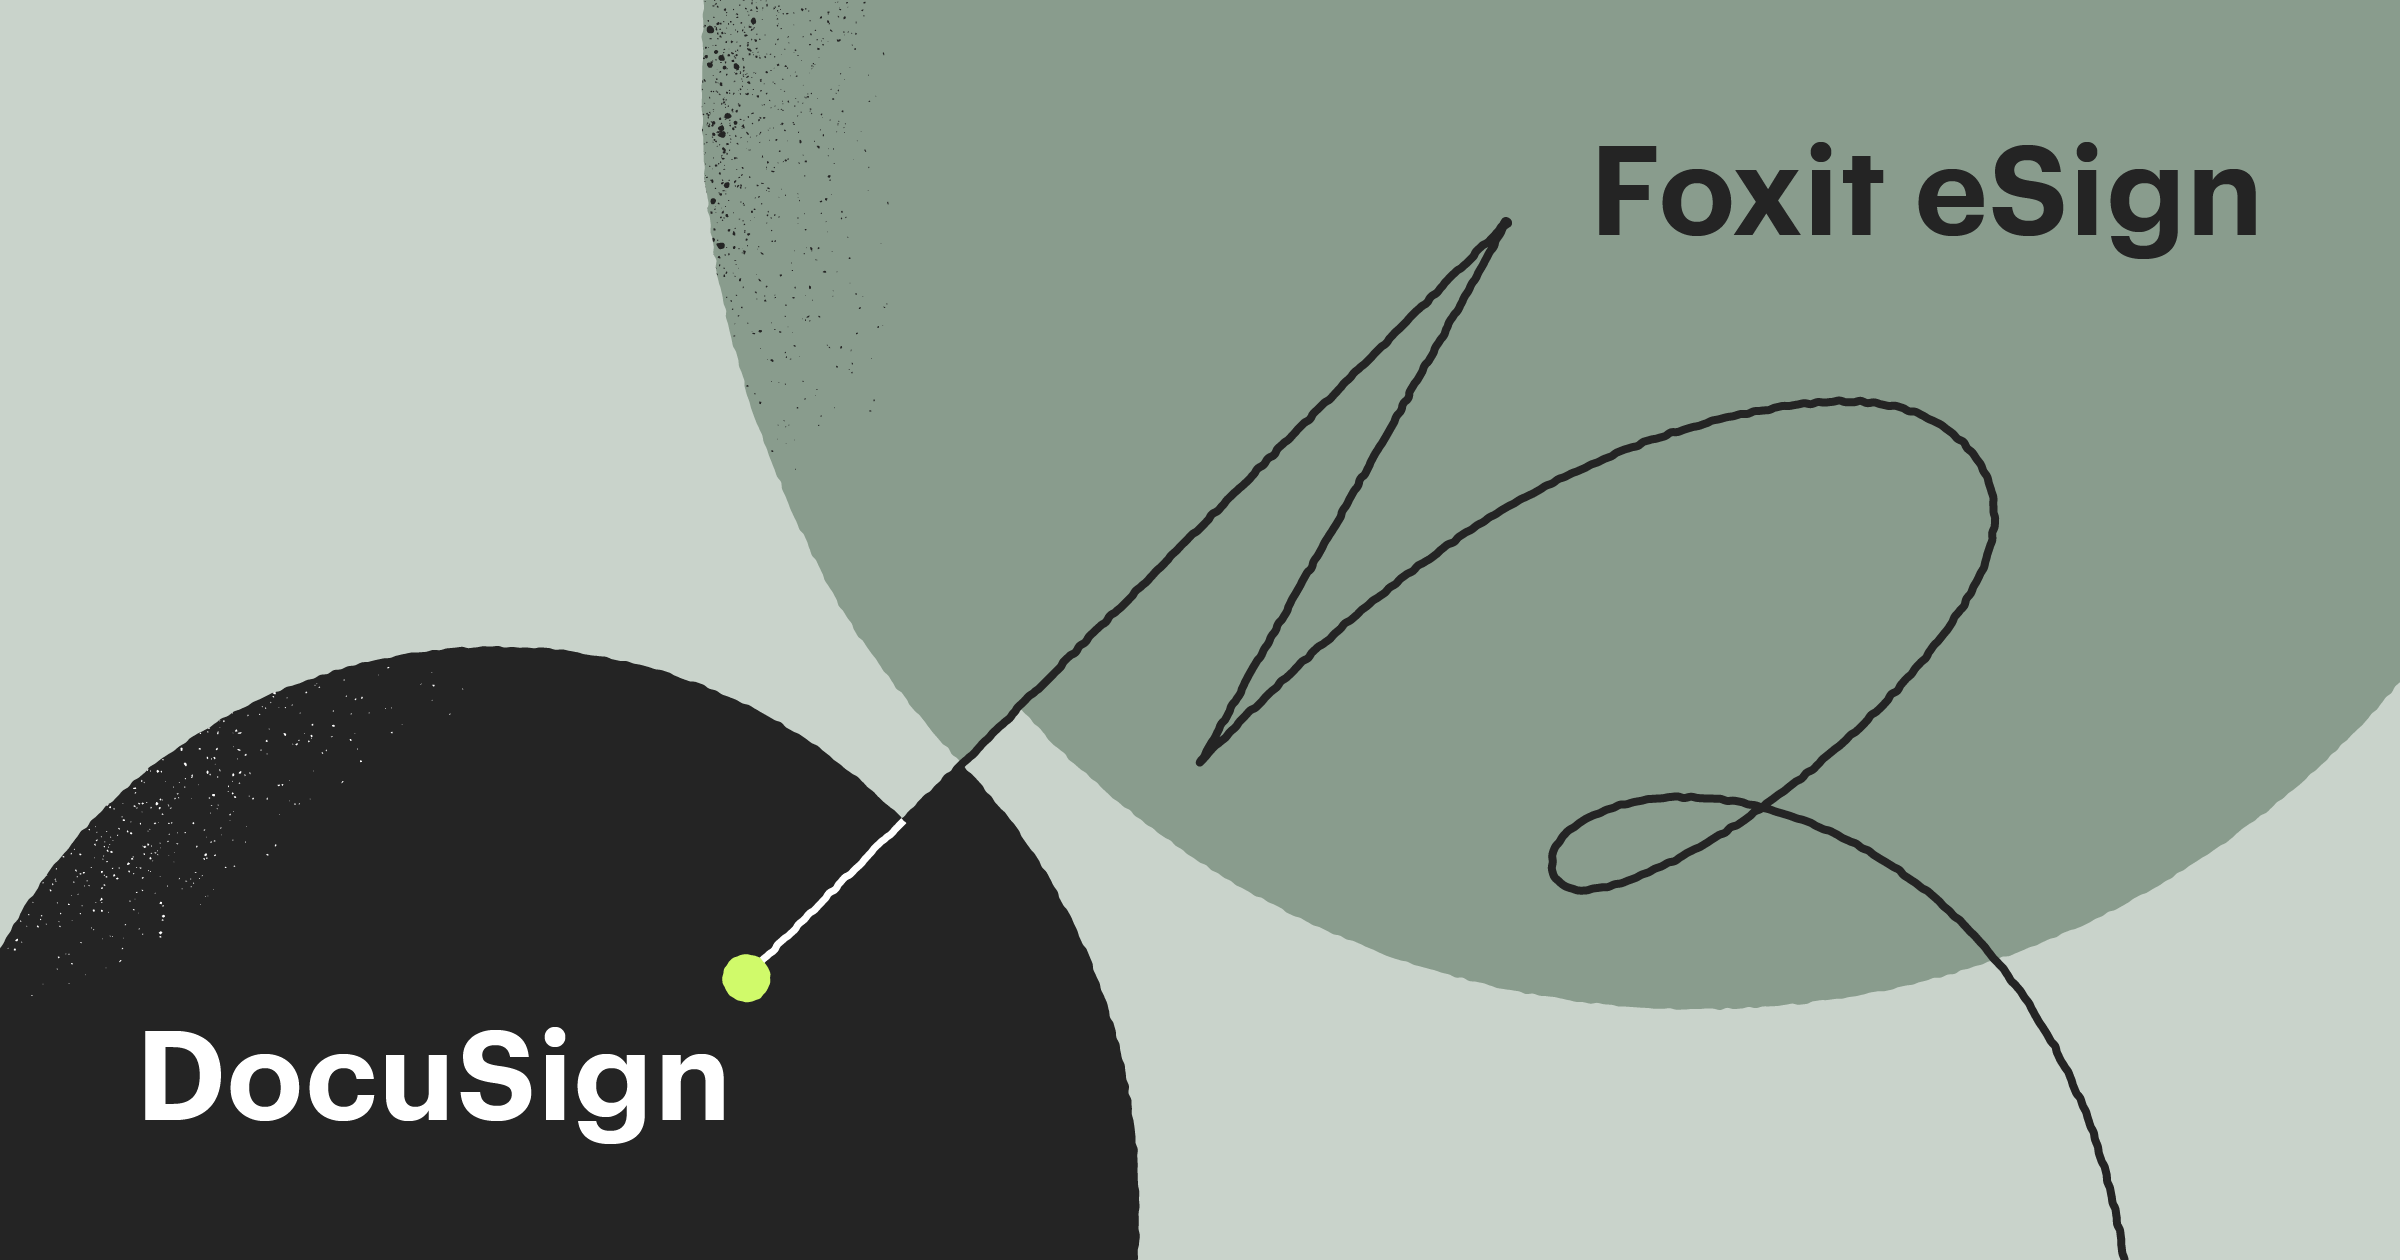 Choosing between DocuSign vs Foxit eSign? Read about their differences before you make a decision